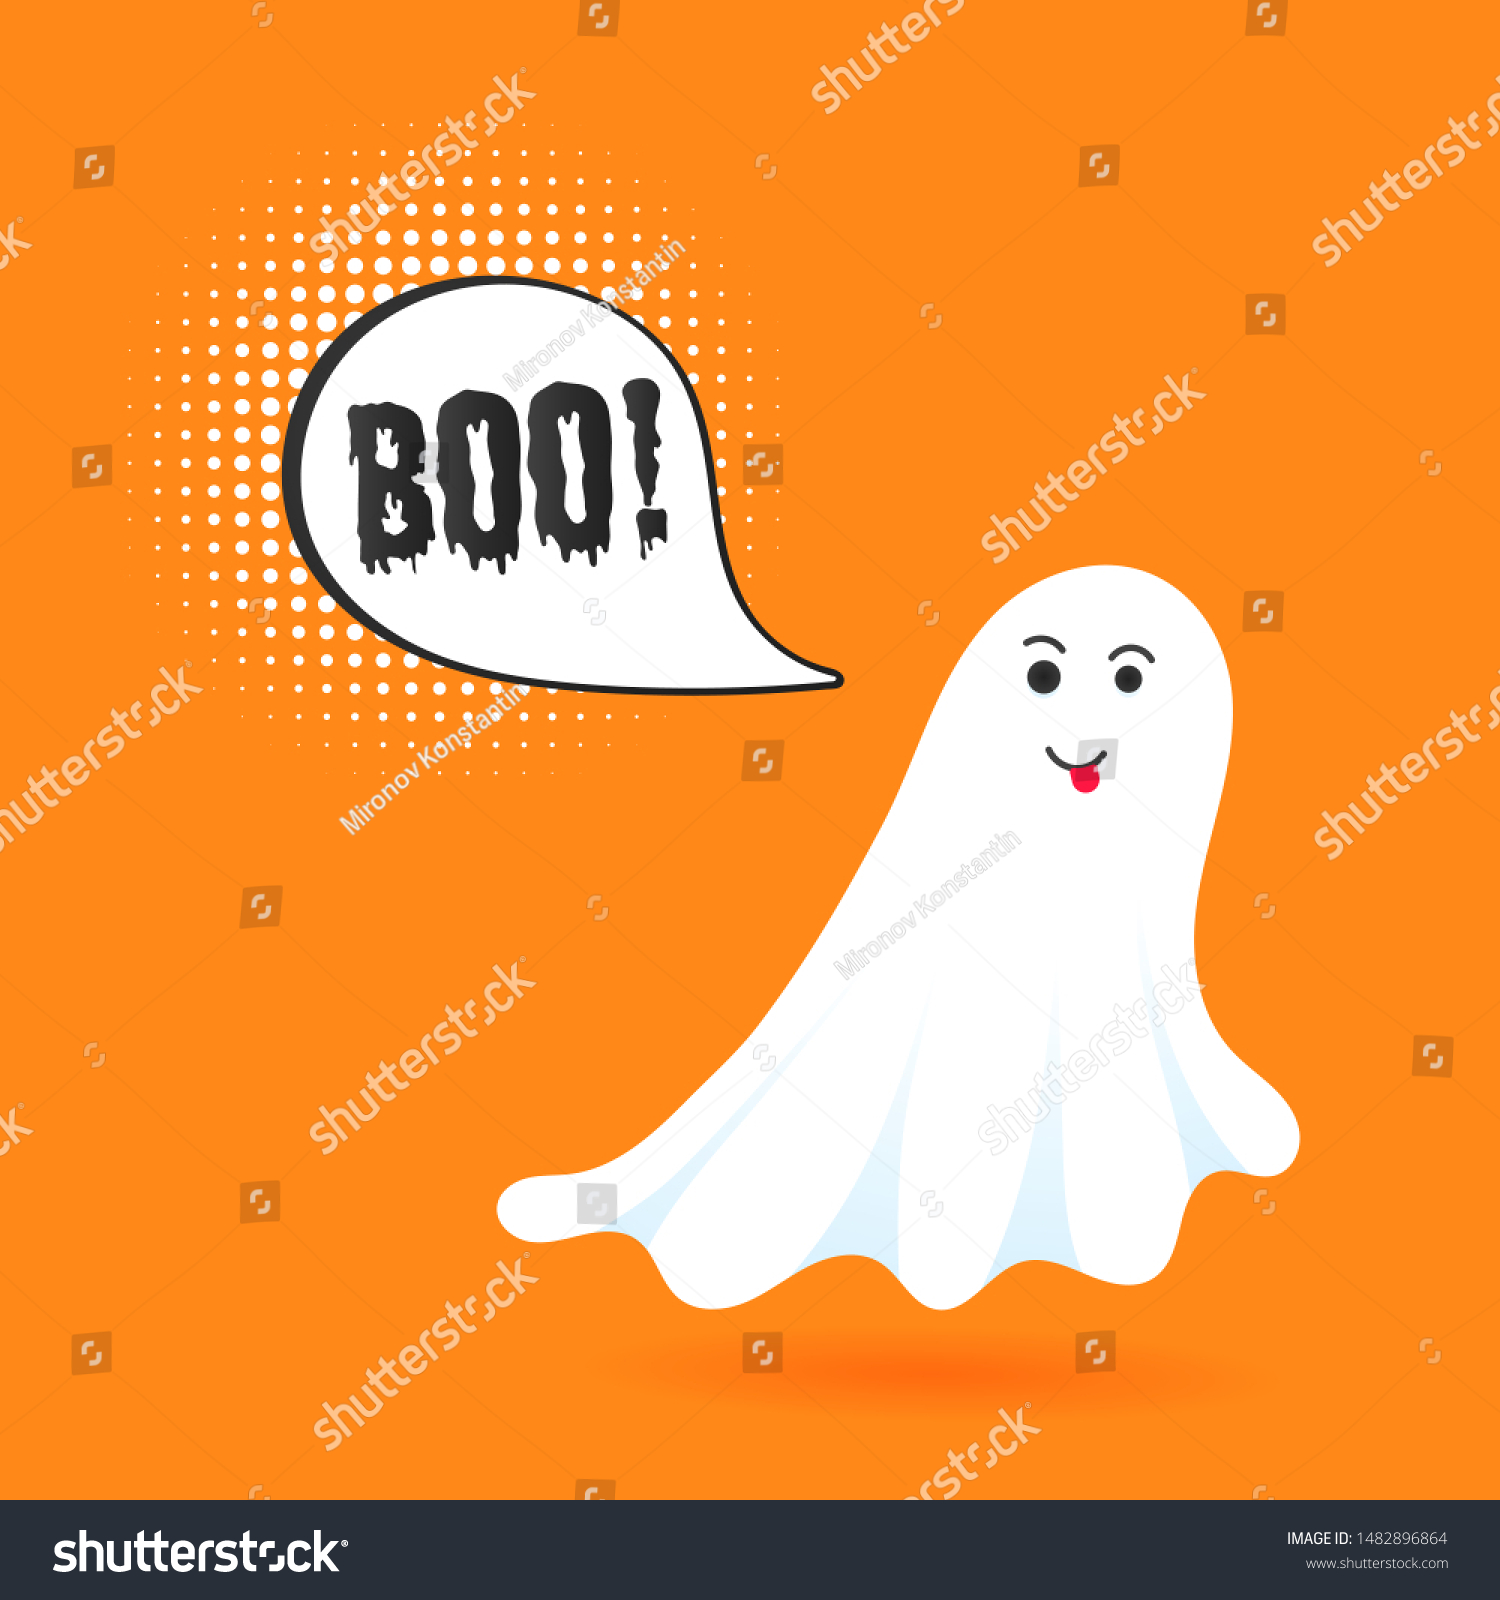 Flying Halloween Funny Spooky Ghost Character Stock Vector (Royalty ...